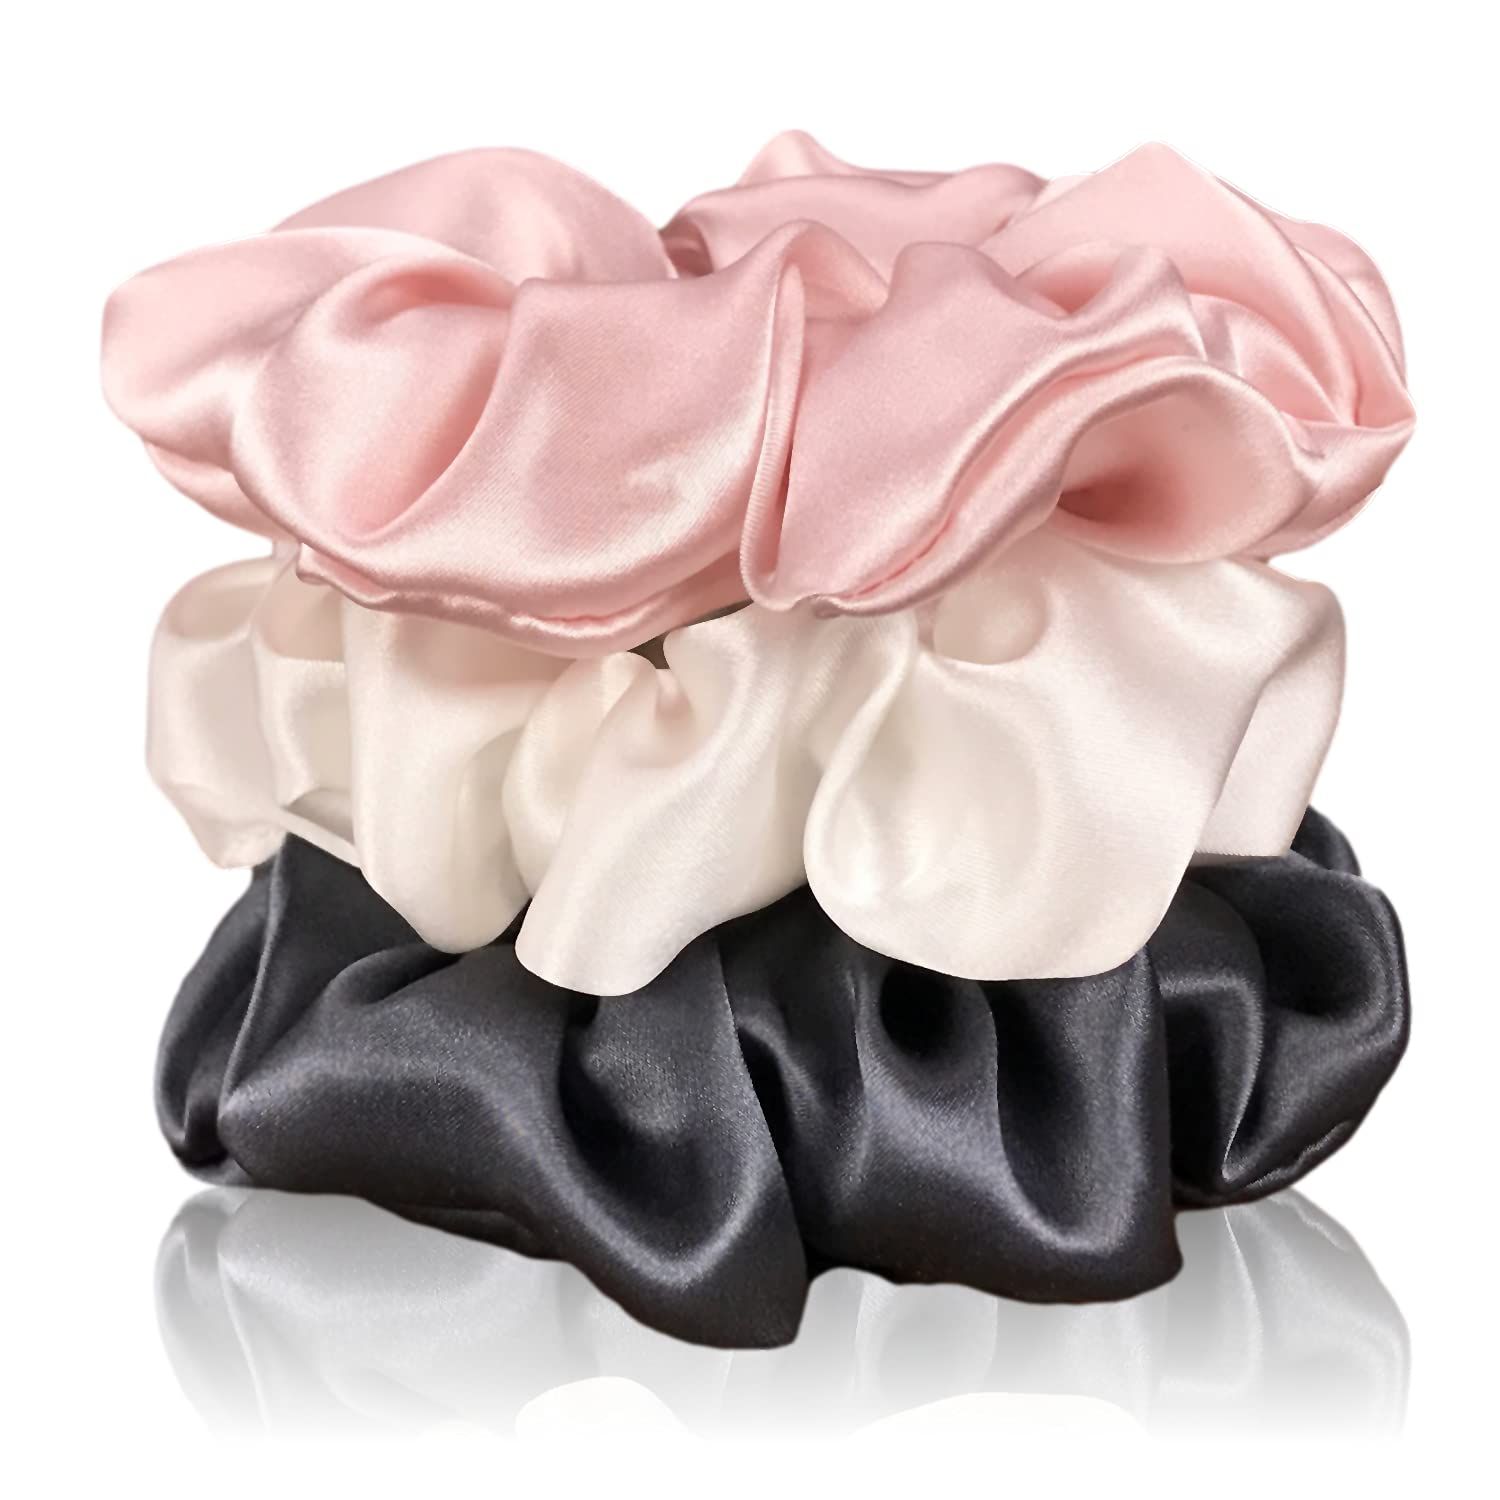 Celestial Silk Mulberry Silk Scrunchies for Hair (Large, Charcoal, Pink, Ivory) | Amazon (US)